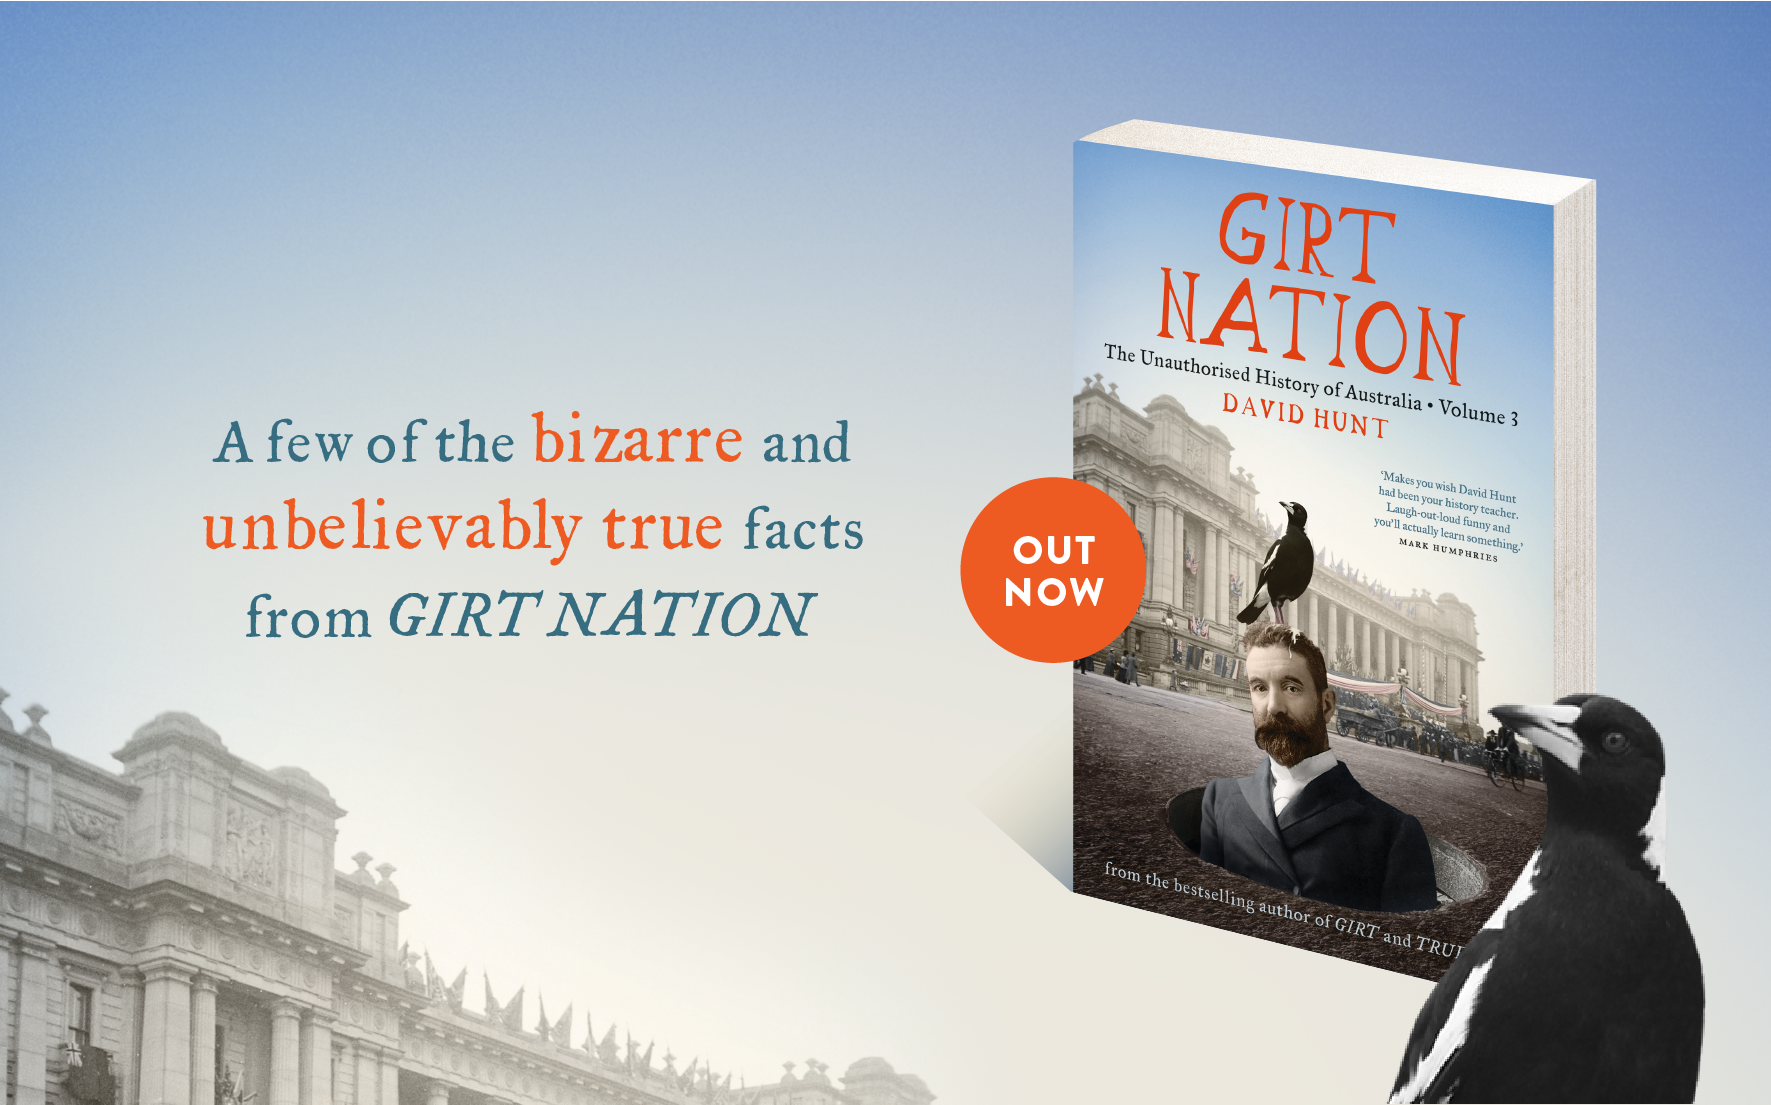 The bizarre and unbelievably true facts from GIRT NATION